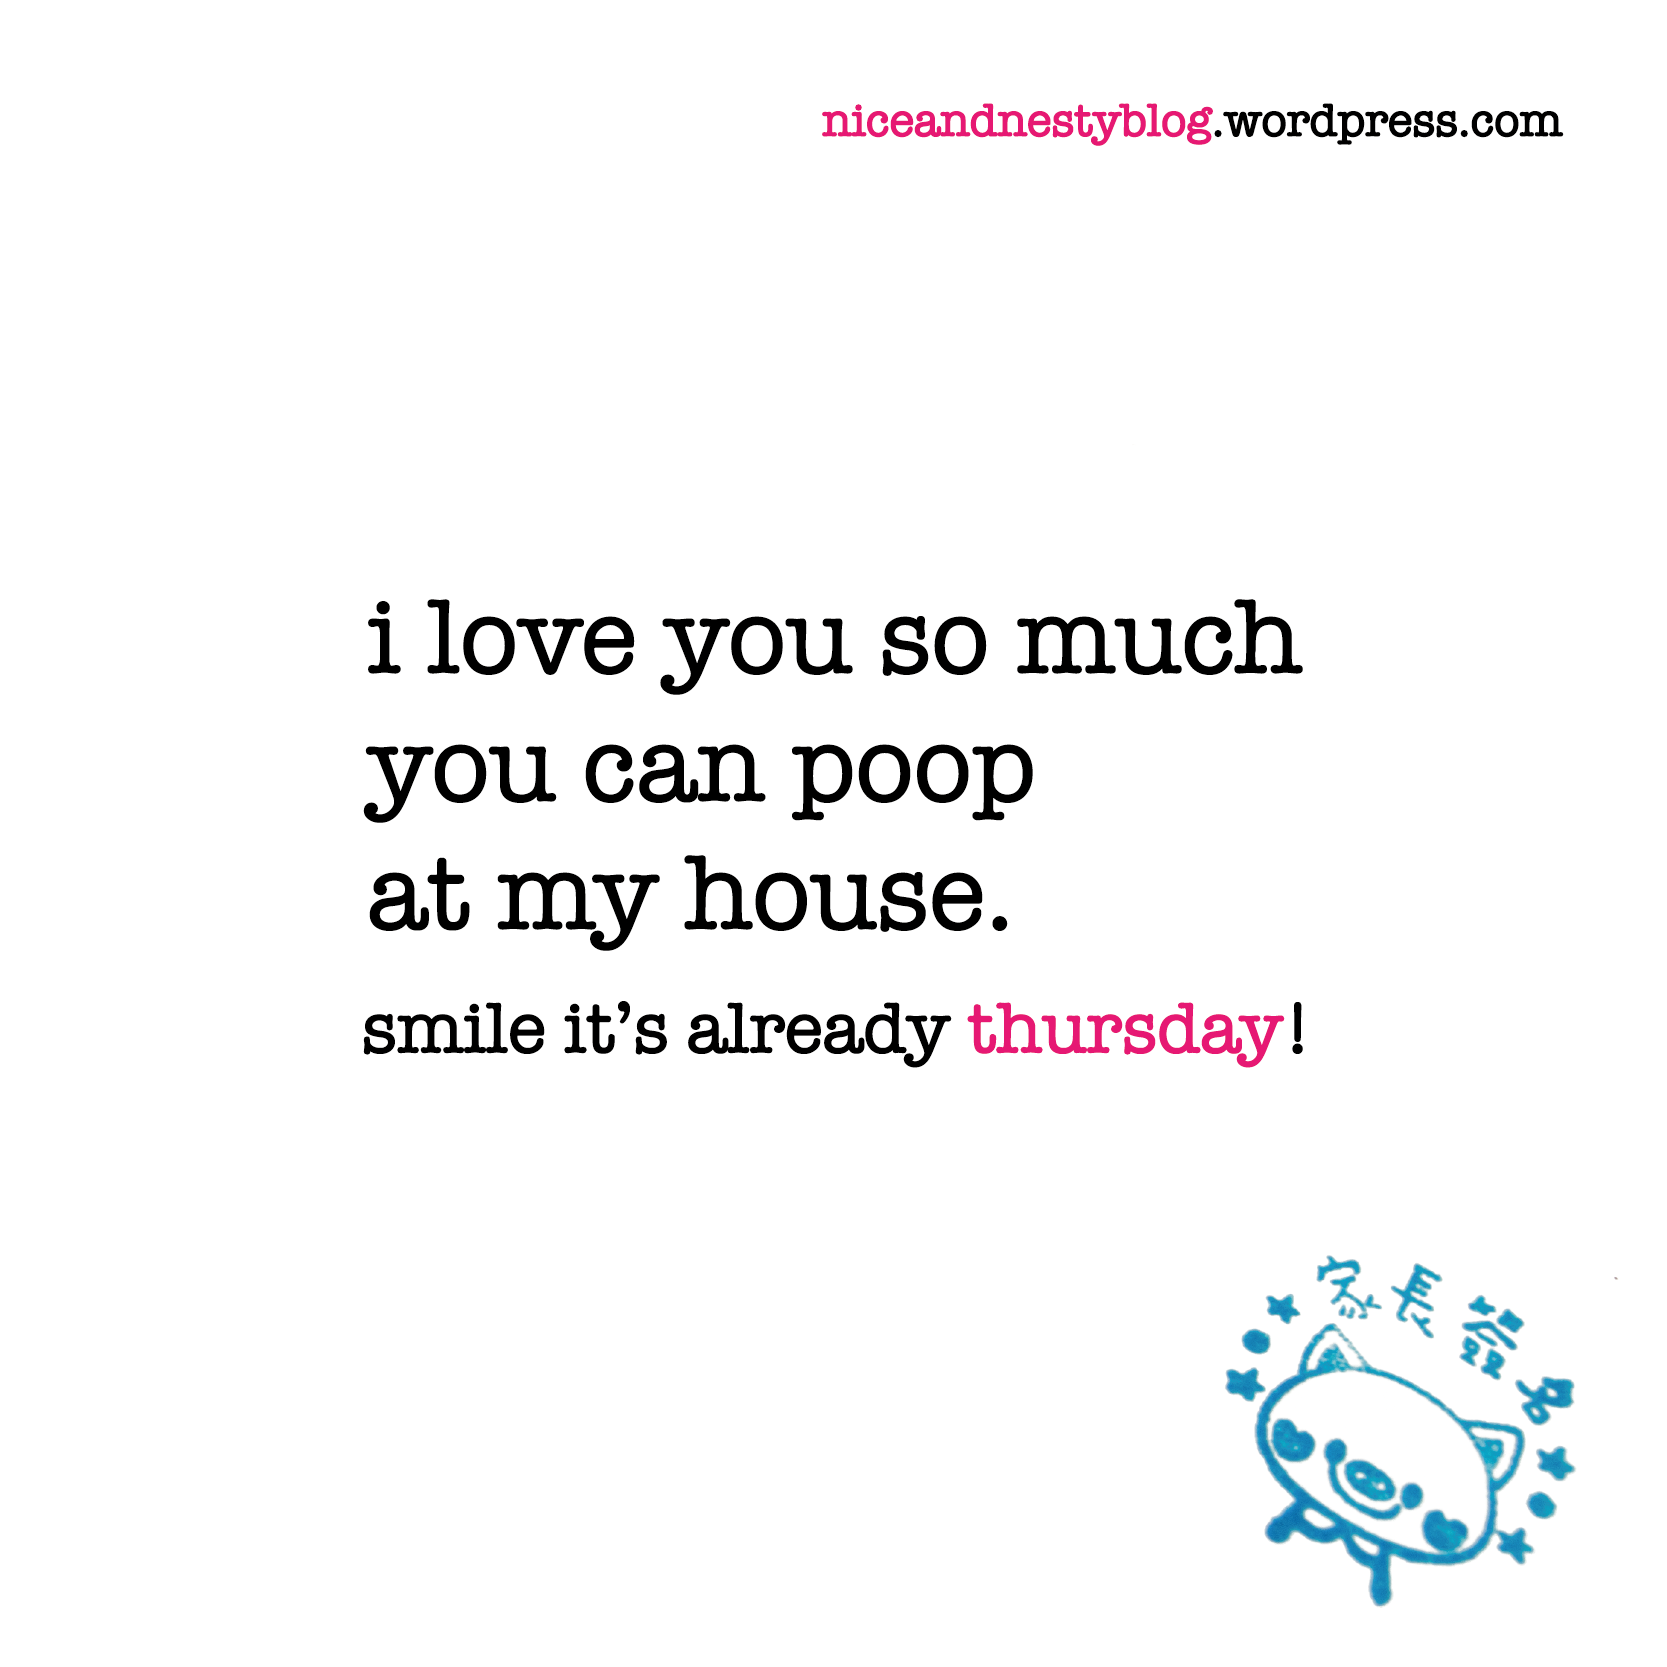 i love you so much you can poop at my house thursday quote